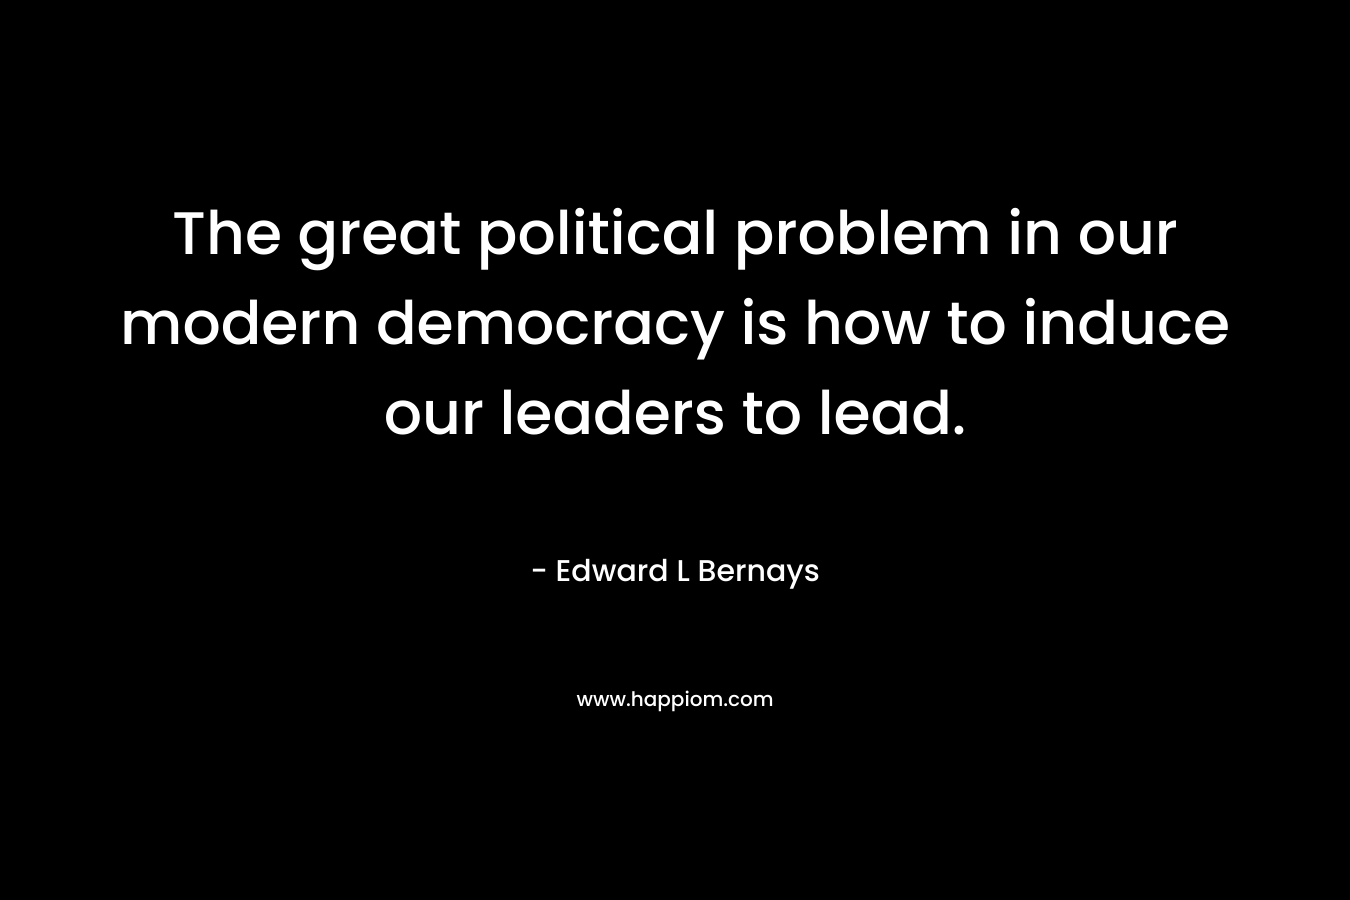 The great political problem in our modern democracy is how to induce our leaders to lead. – Edward L Bernays